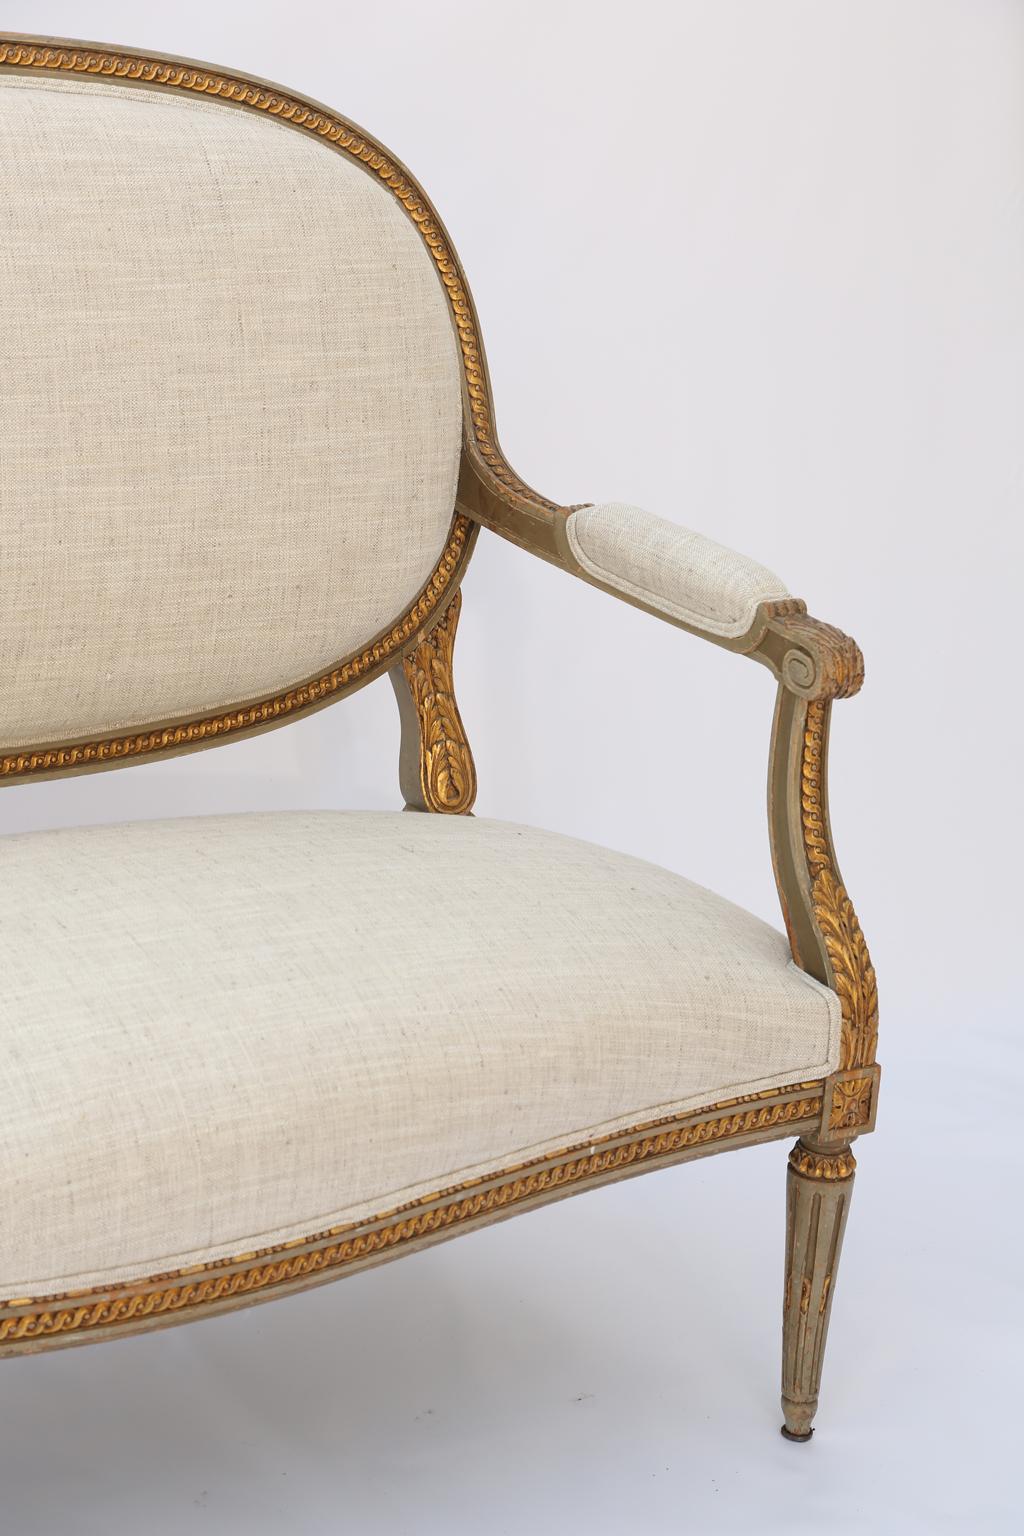 Settee, in Louis XVI style, having a painted and parcel gilt frame, padded medallion backs surmounted by a crest carved as a bow flanked by laureling, joined by acanthine scrolling arms to the padded seat, bowed apron raised on tapering stop-fluted